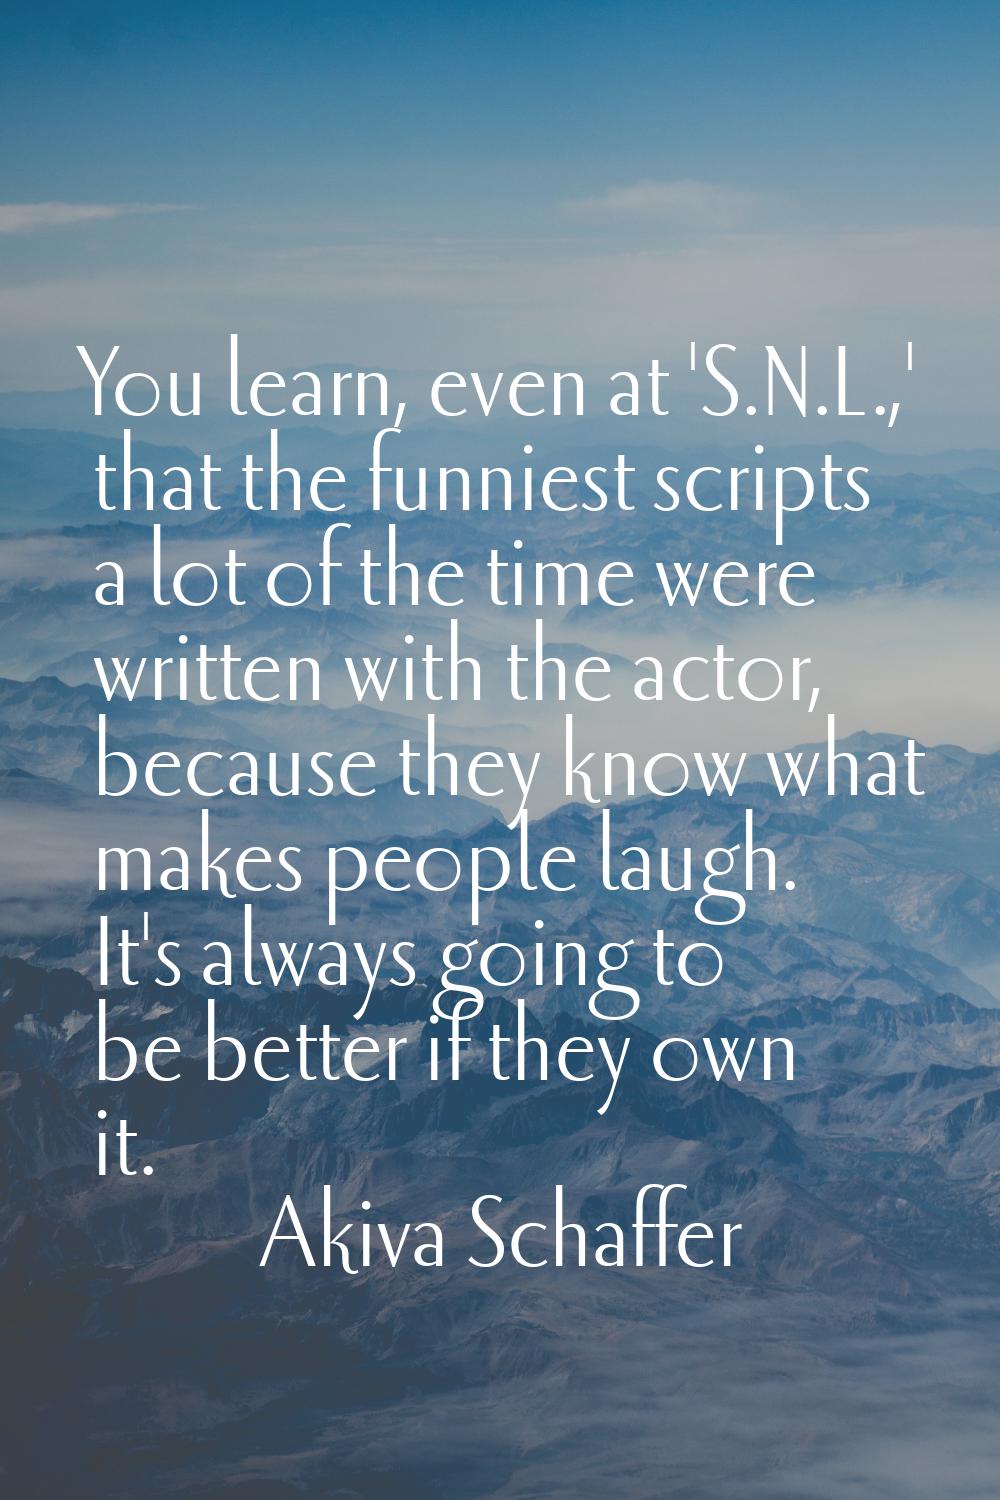 You learn, even at 'S.N.L.,' that the funniest scripts a lot of the time were written with the acto